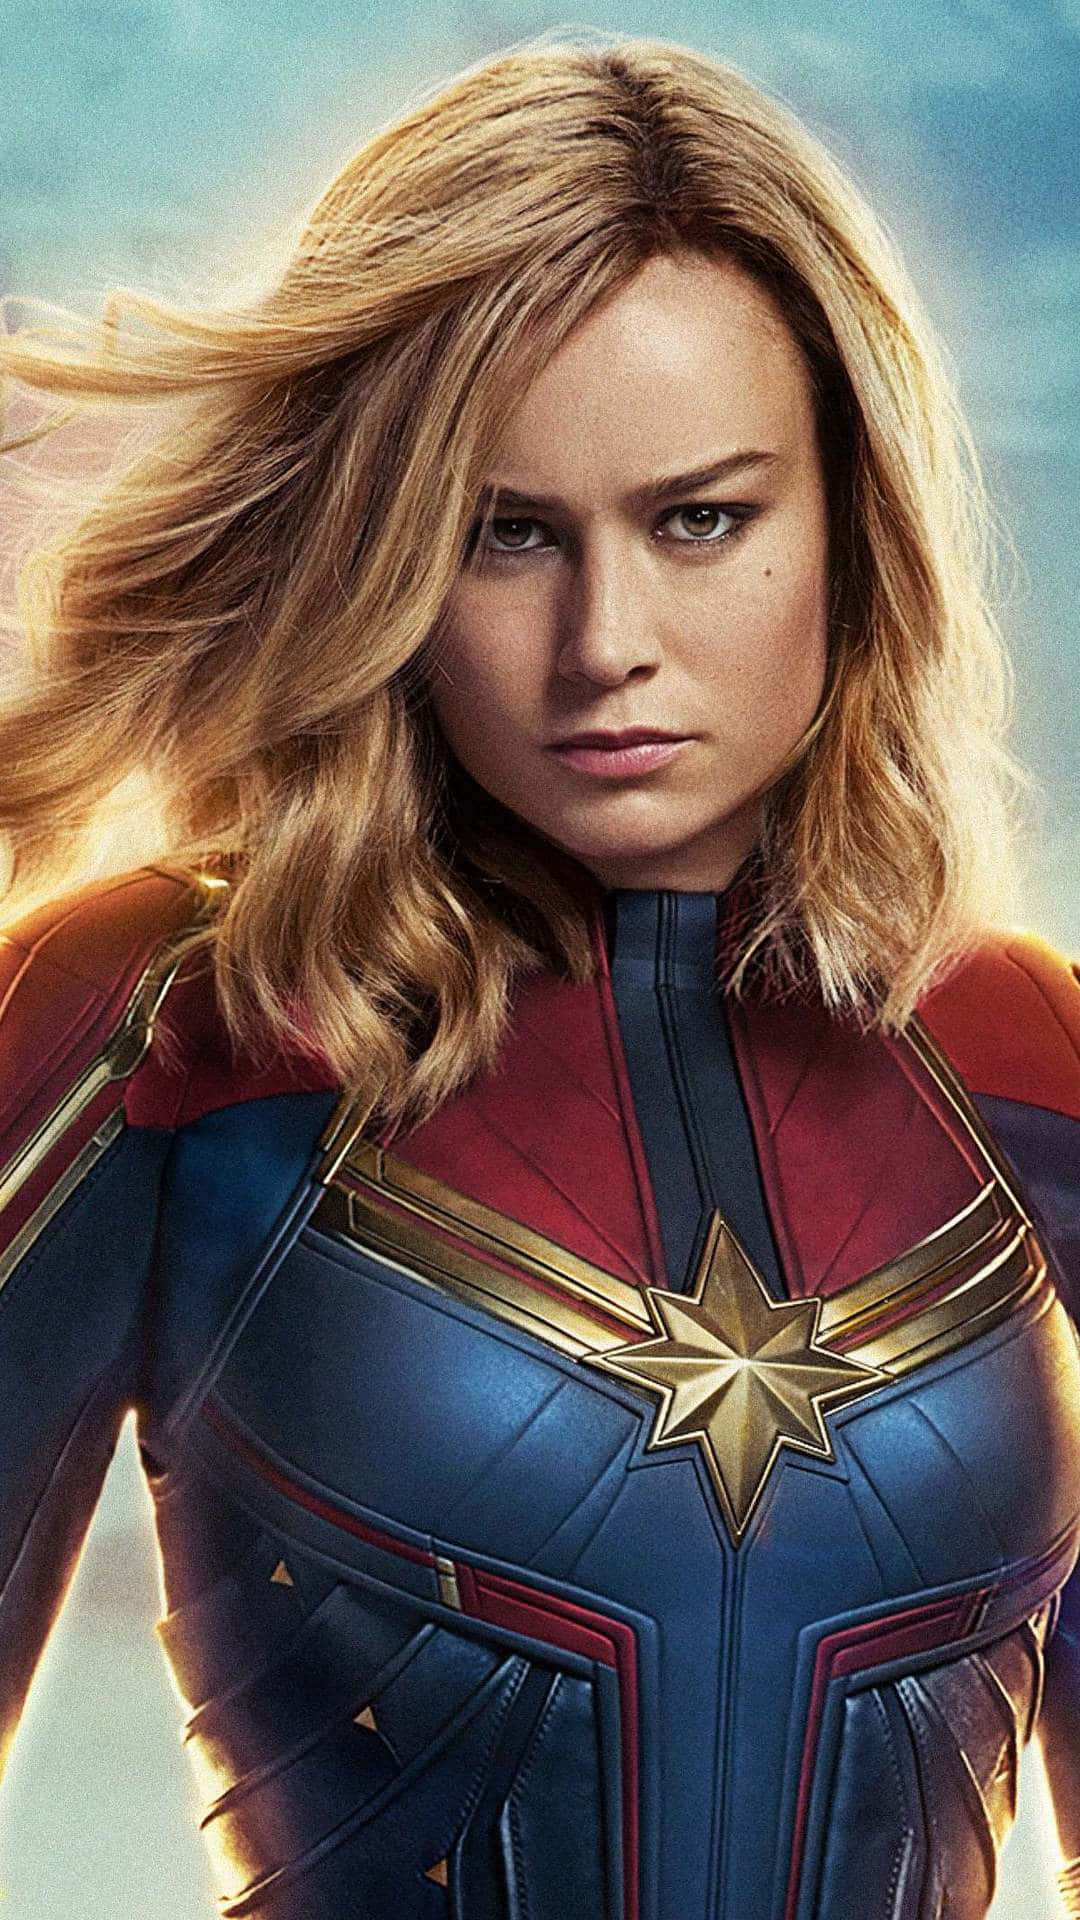 "#CarolDanvers is ready to save the world as #CaptainMarvel" Wallpaper